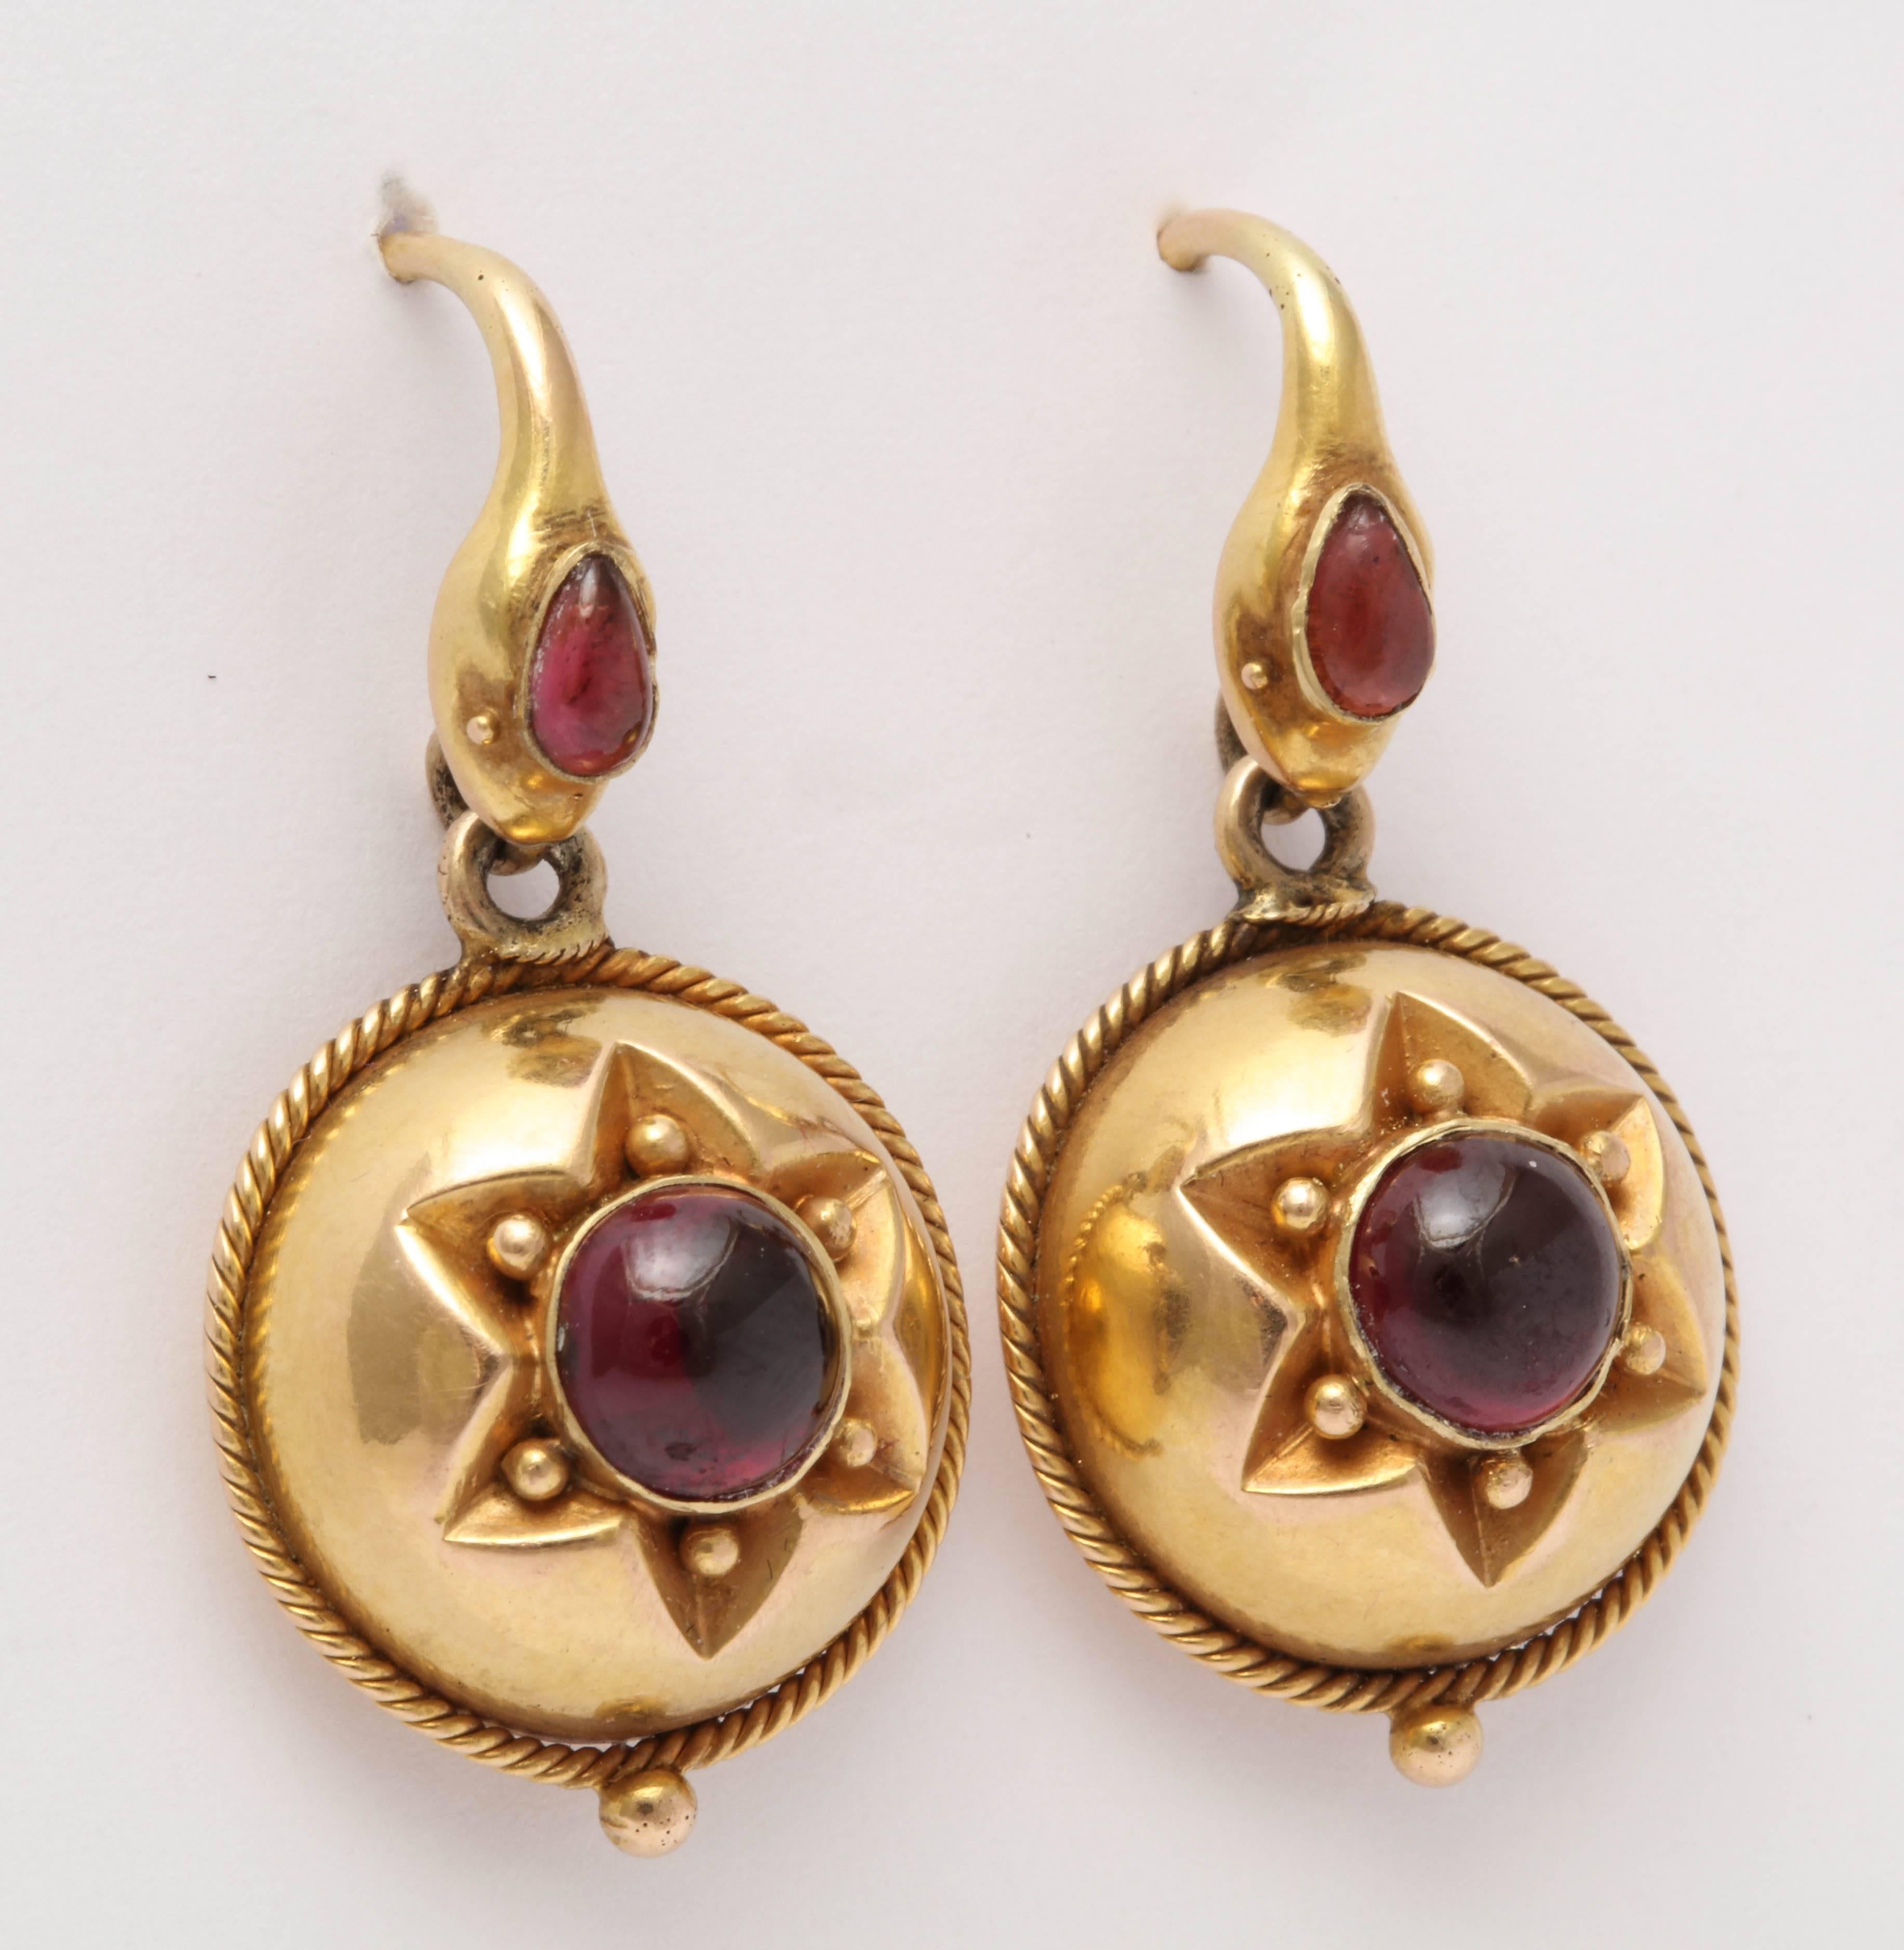 A whimsical example of Victorian snake symbolism. These lovely dangle earrings are topped with a snake's head. The heads are set with a pear shaped garnet. Below is a round cabochon garnet set in a star design in round yellow gold bulbous disk with